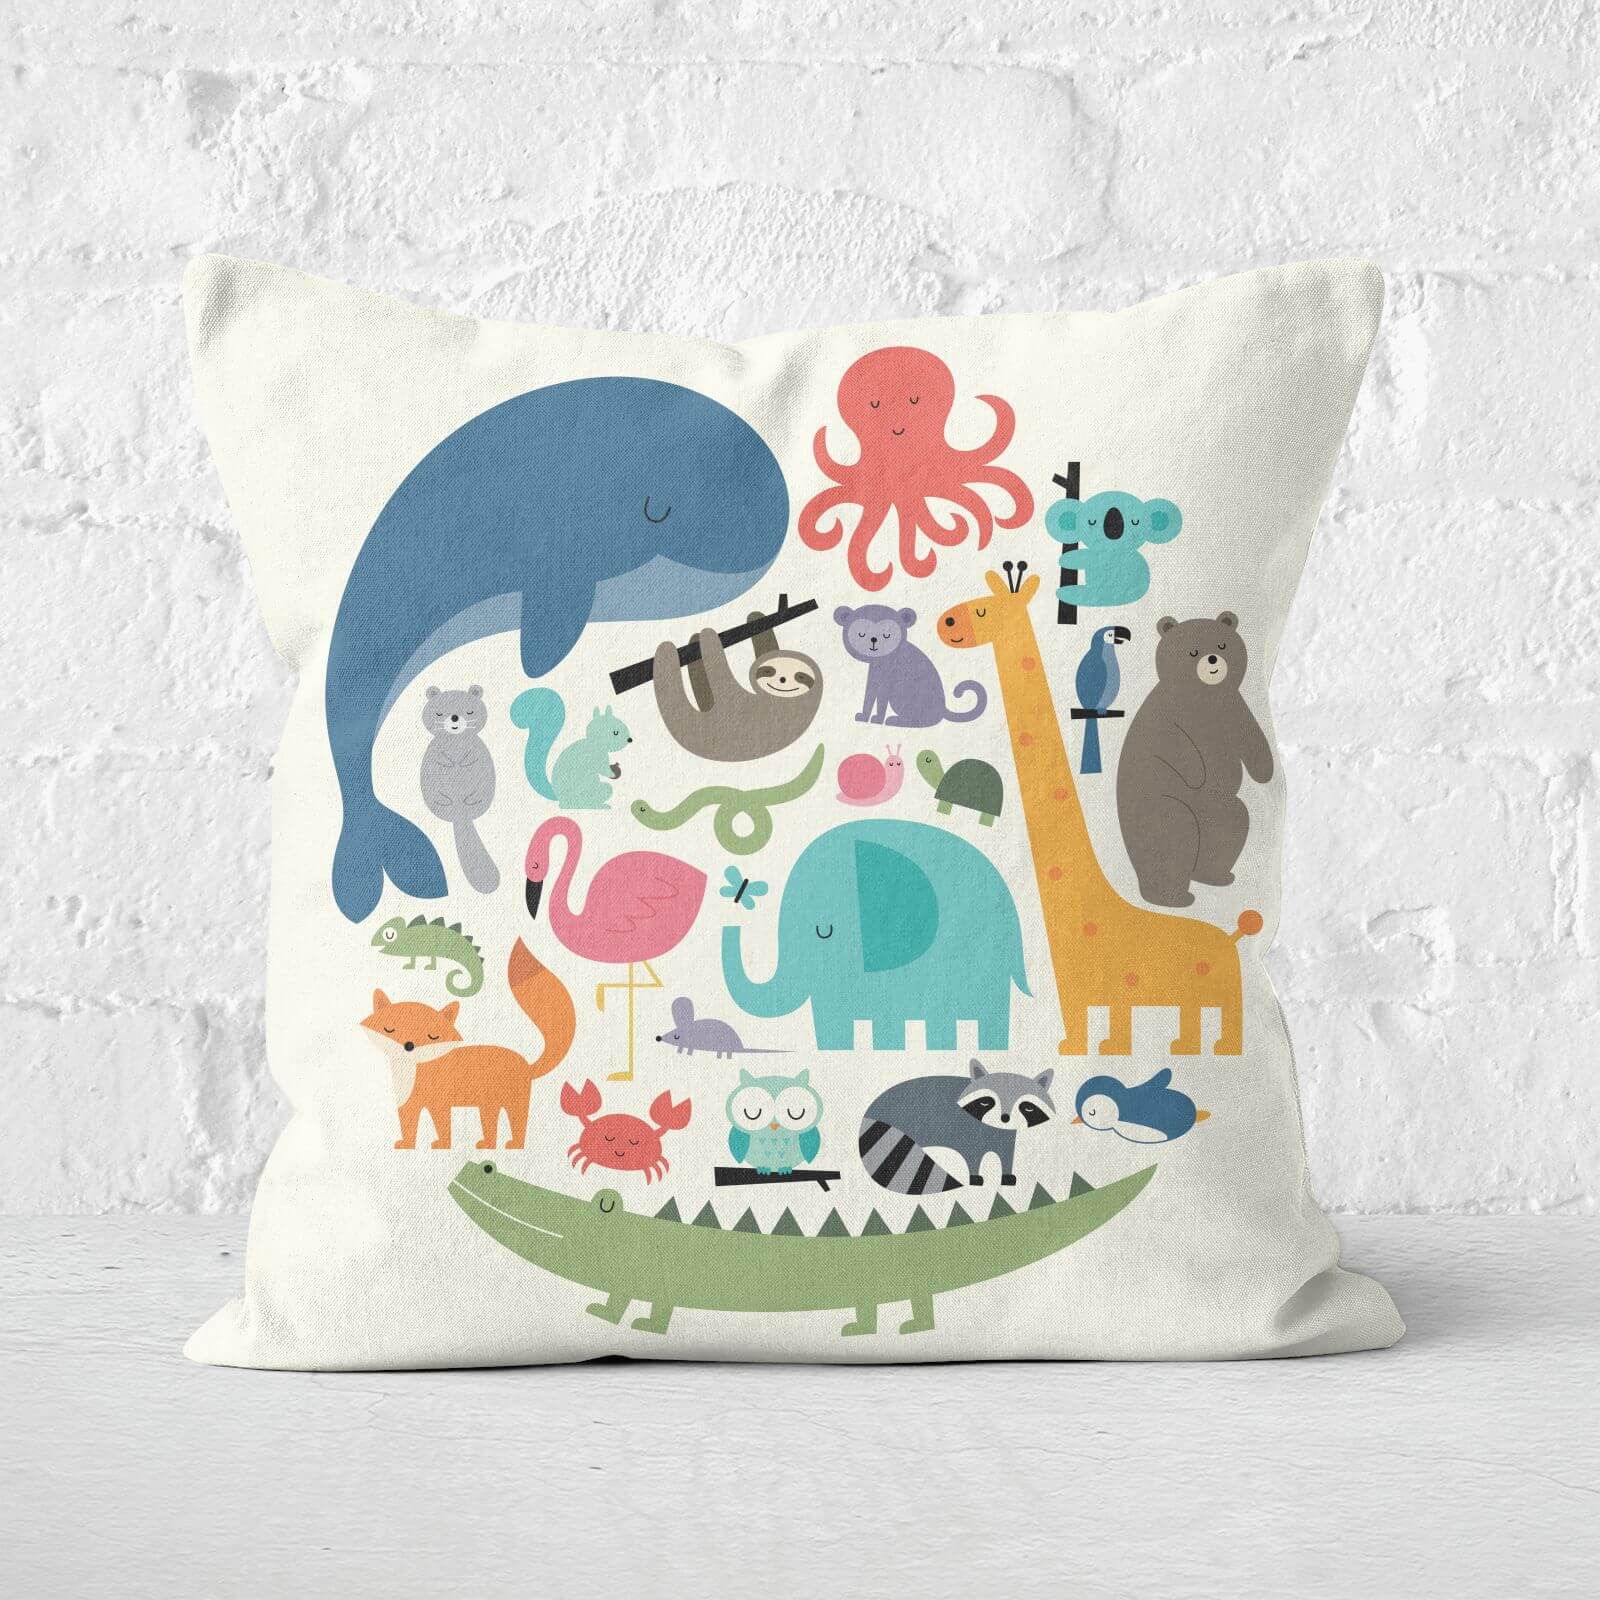 Andy Westface We Are One Square Cushion - 60x60cm - Soft Touch